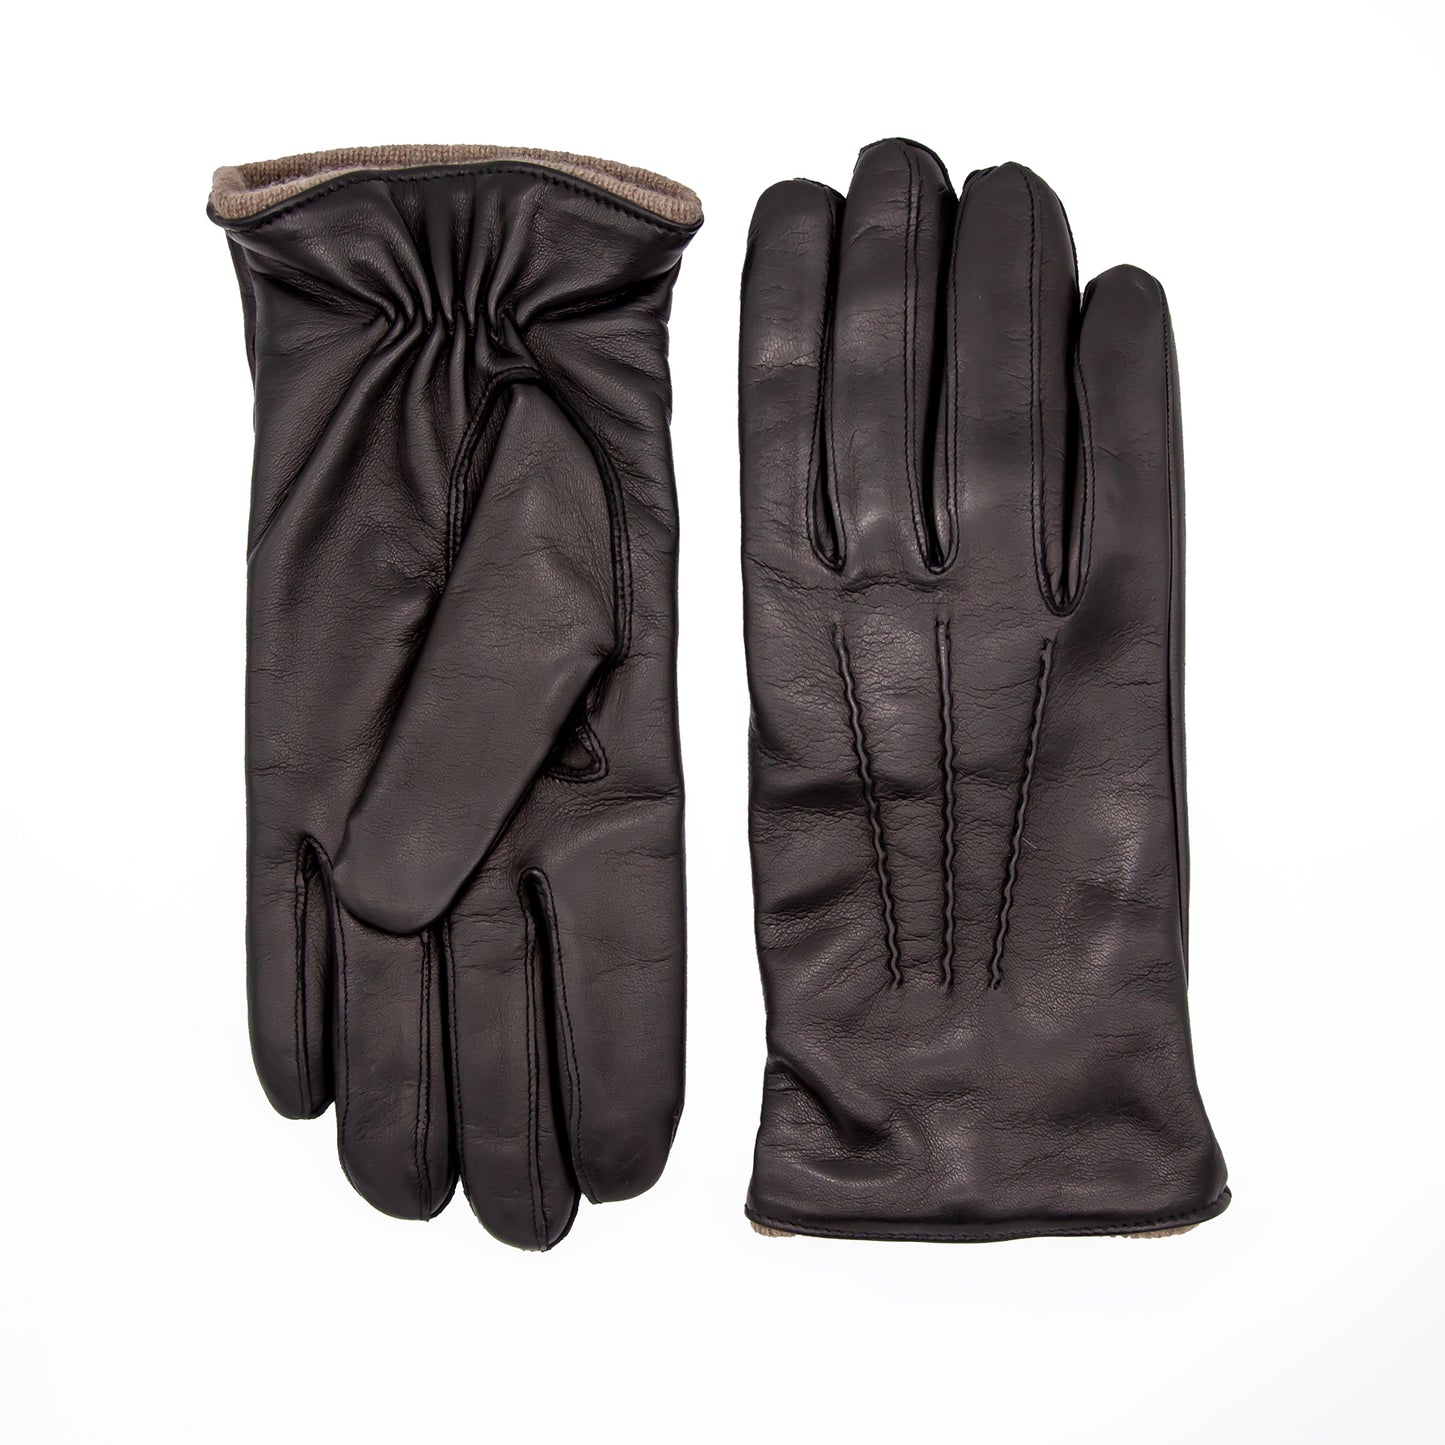 Men's black nappa leather gloves and cashmere lining